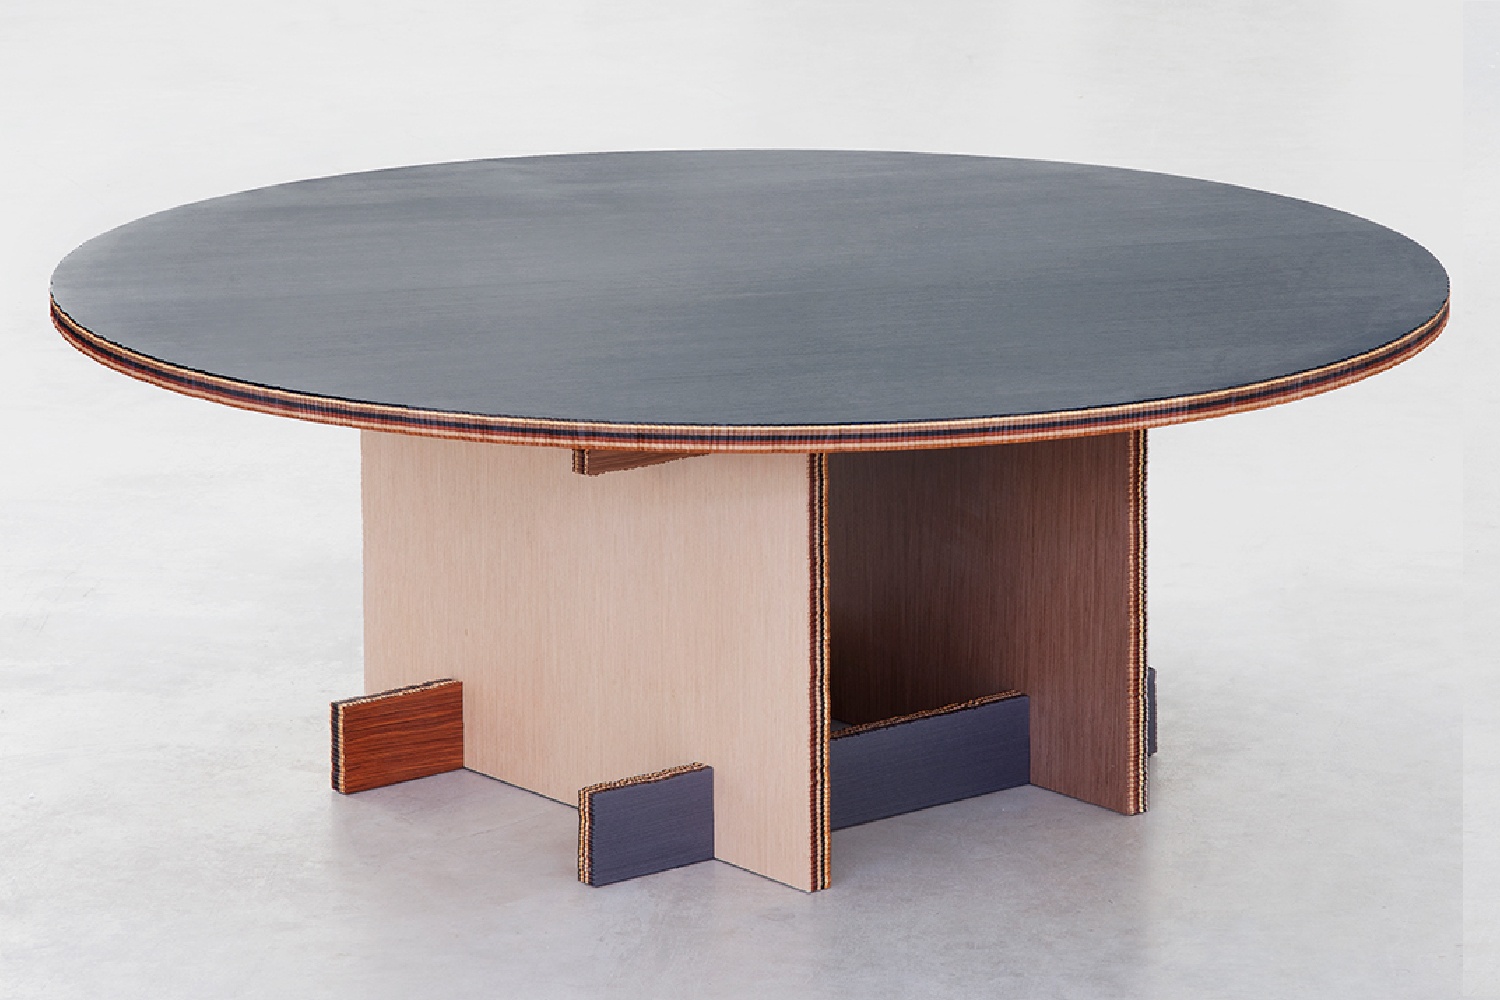 ALPI reclaimed wood in the new “George” collection of tables designed by Marco Campardo for SEEDS London Gallery